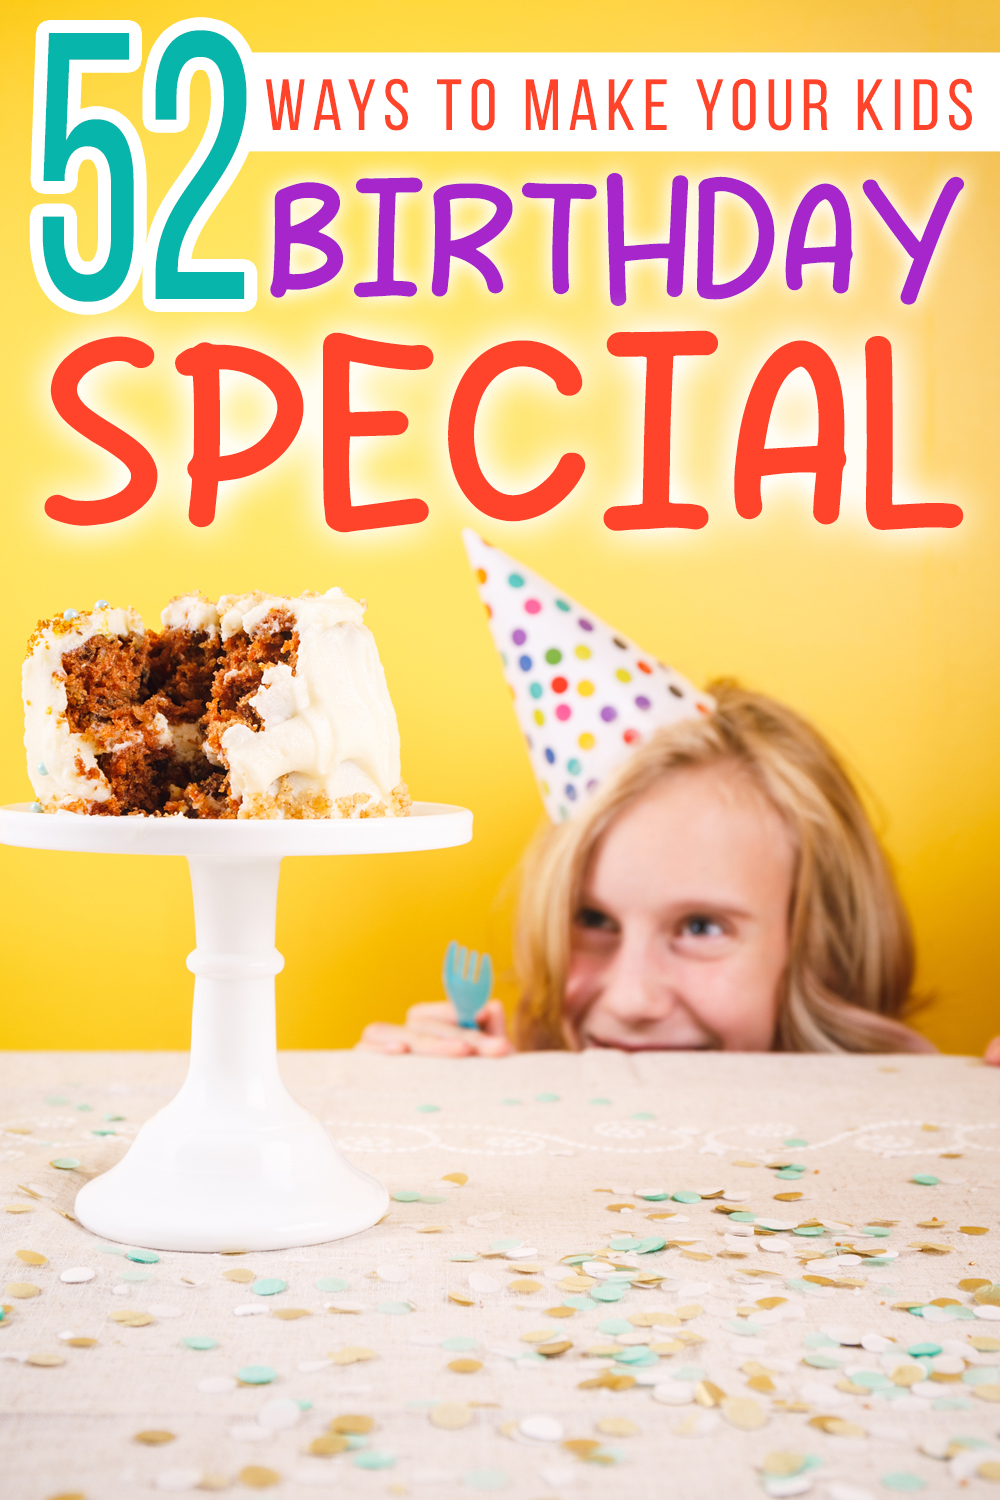 Lots of fun ideas to make your kids birthday special.